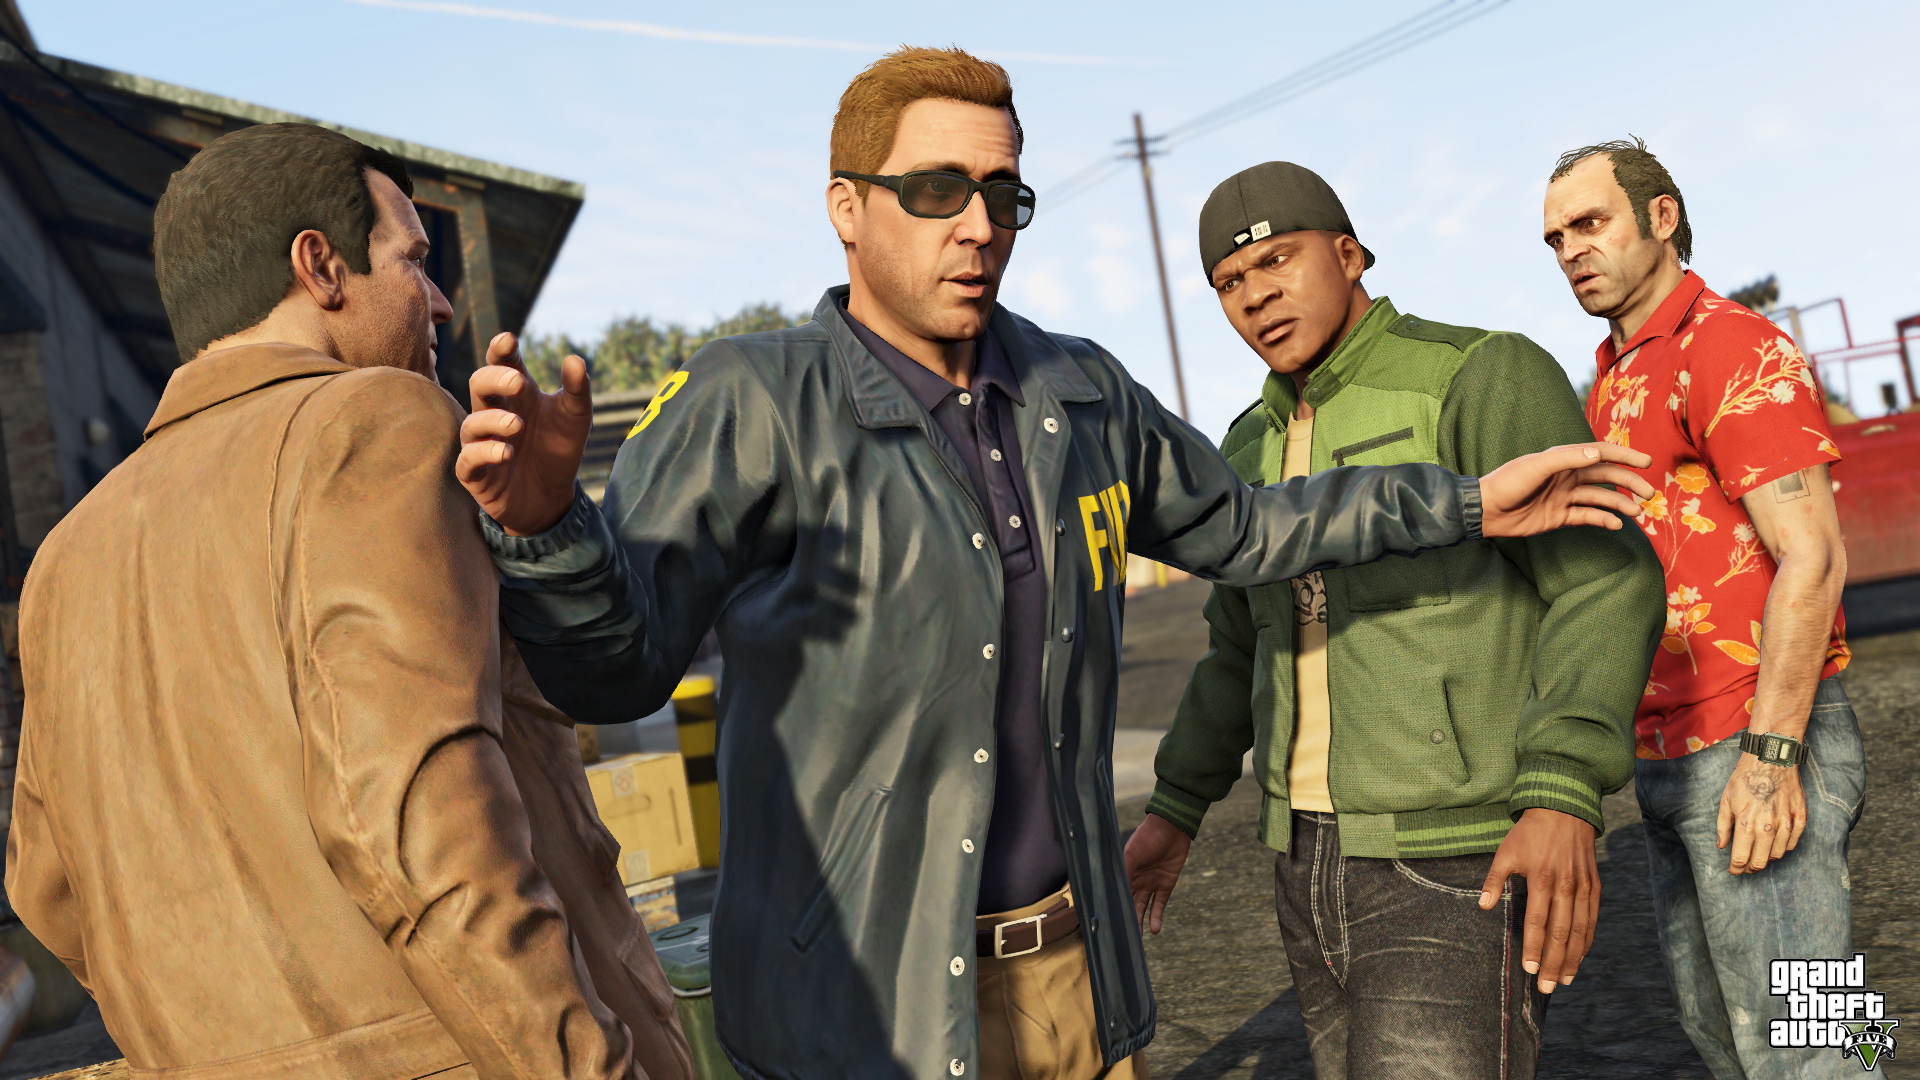 grand theft auto 5 sales charts playstation store downloads sales 2018